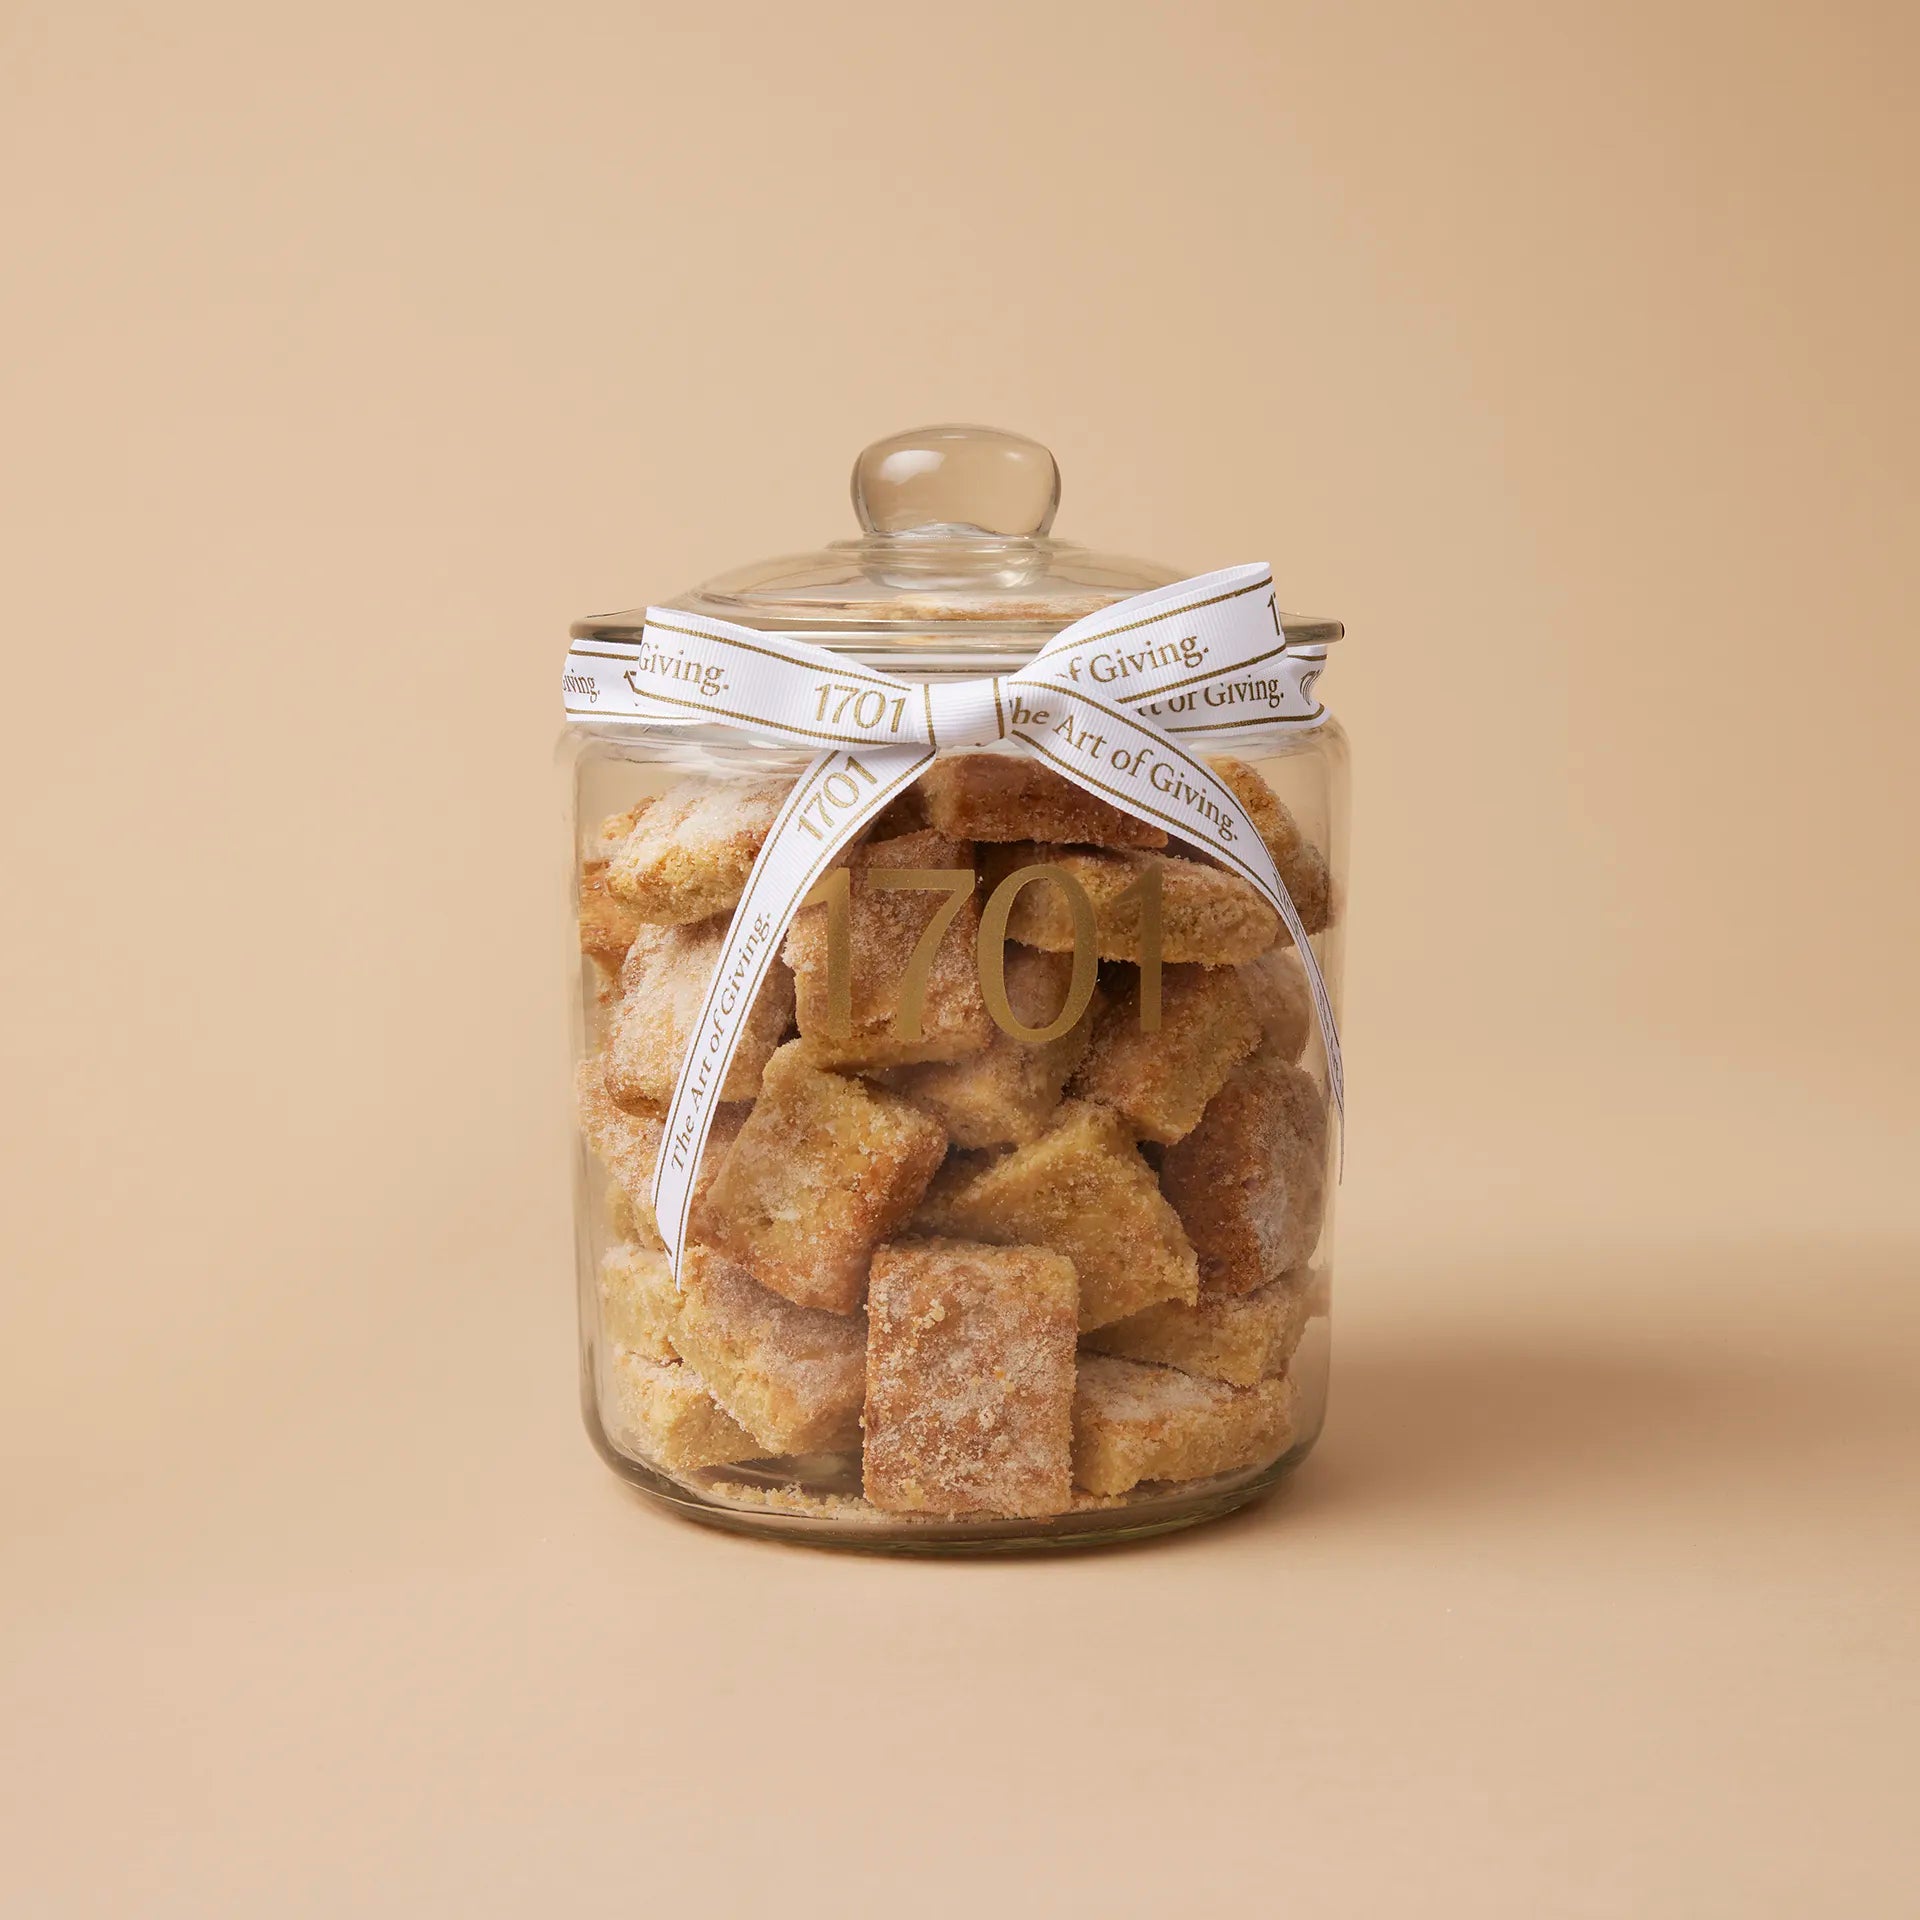 A 1kg glass jar of handmade biscuits with macadamia nuts and nougat, presented in a glass jar with a hand-tied signature ribbon on a warm background, with the product label visible on the front of the jar. The biscuits are SANHA Halaal approved, making them a perfect gift idea for anyone who appreciates high-quality biscuits made with care..